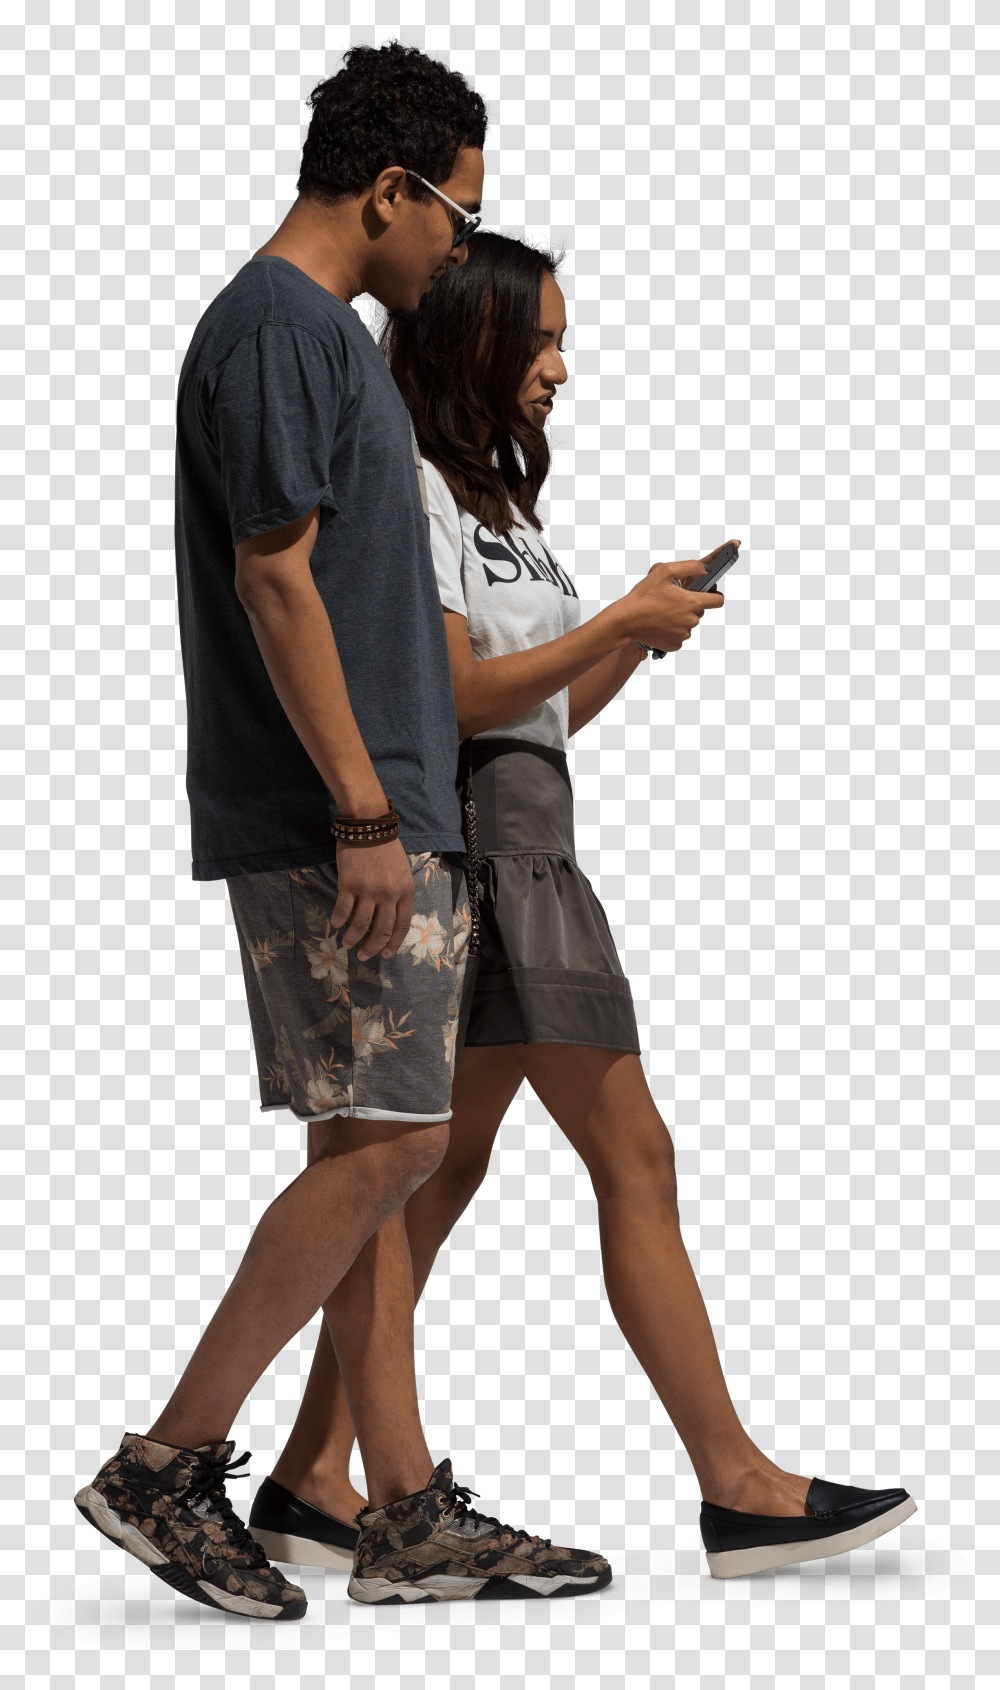 Cut Out People Free Cutout People Photos People Cut Out Transparent Png